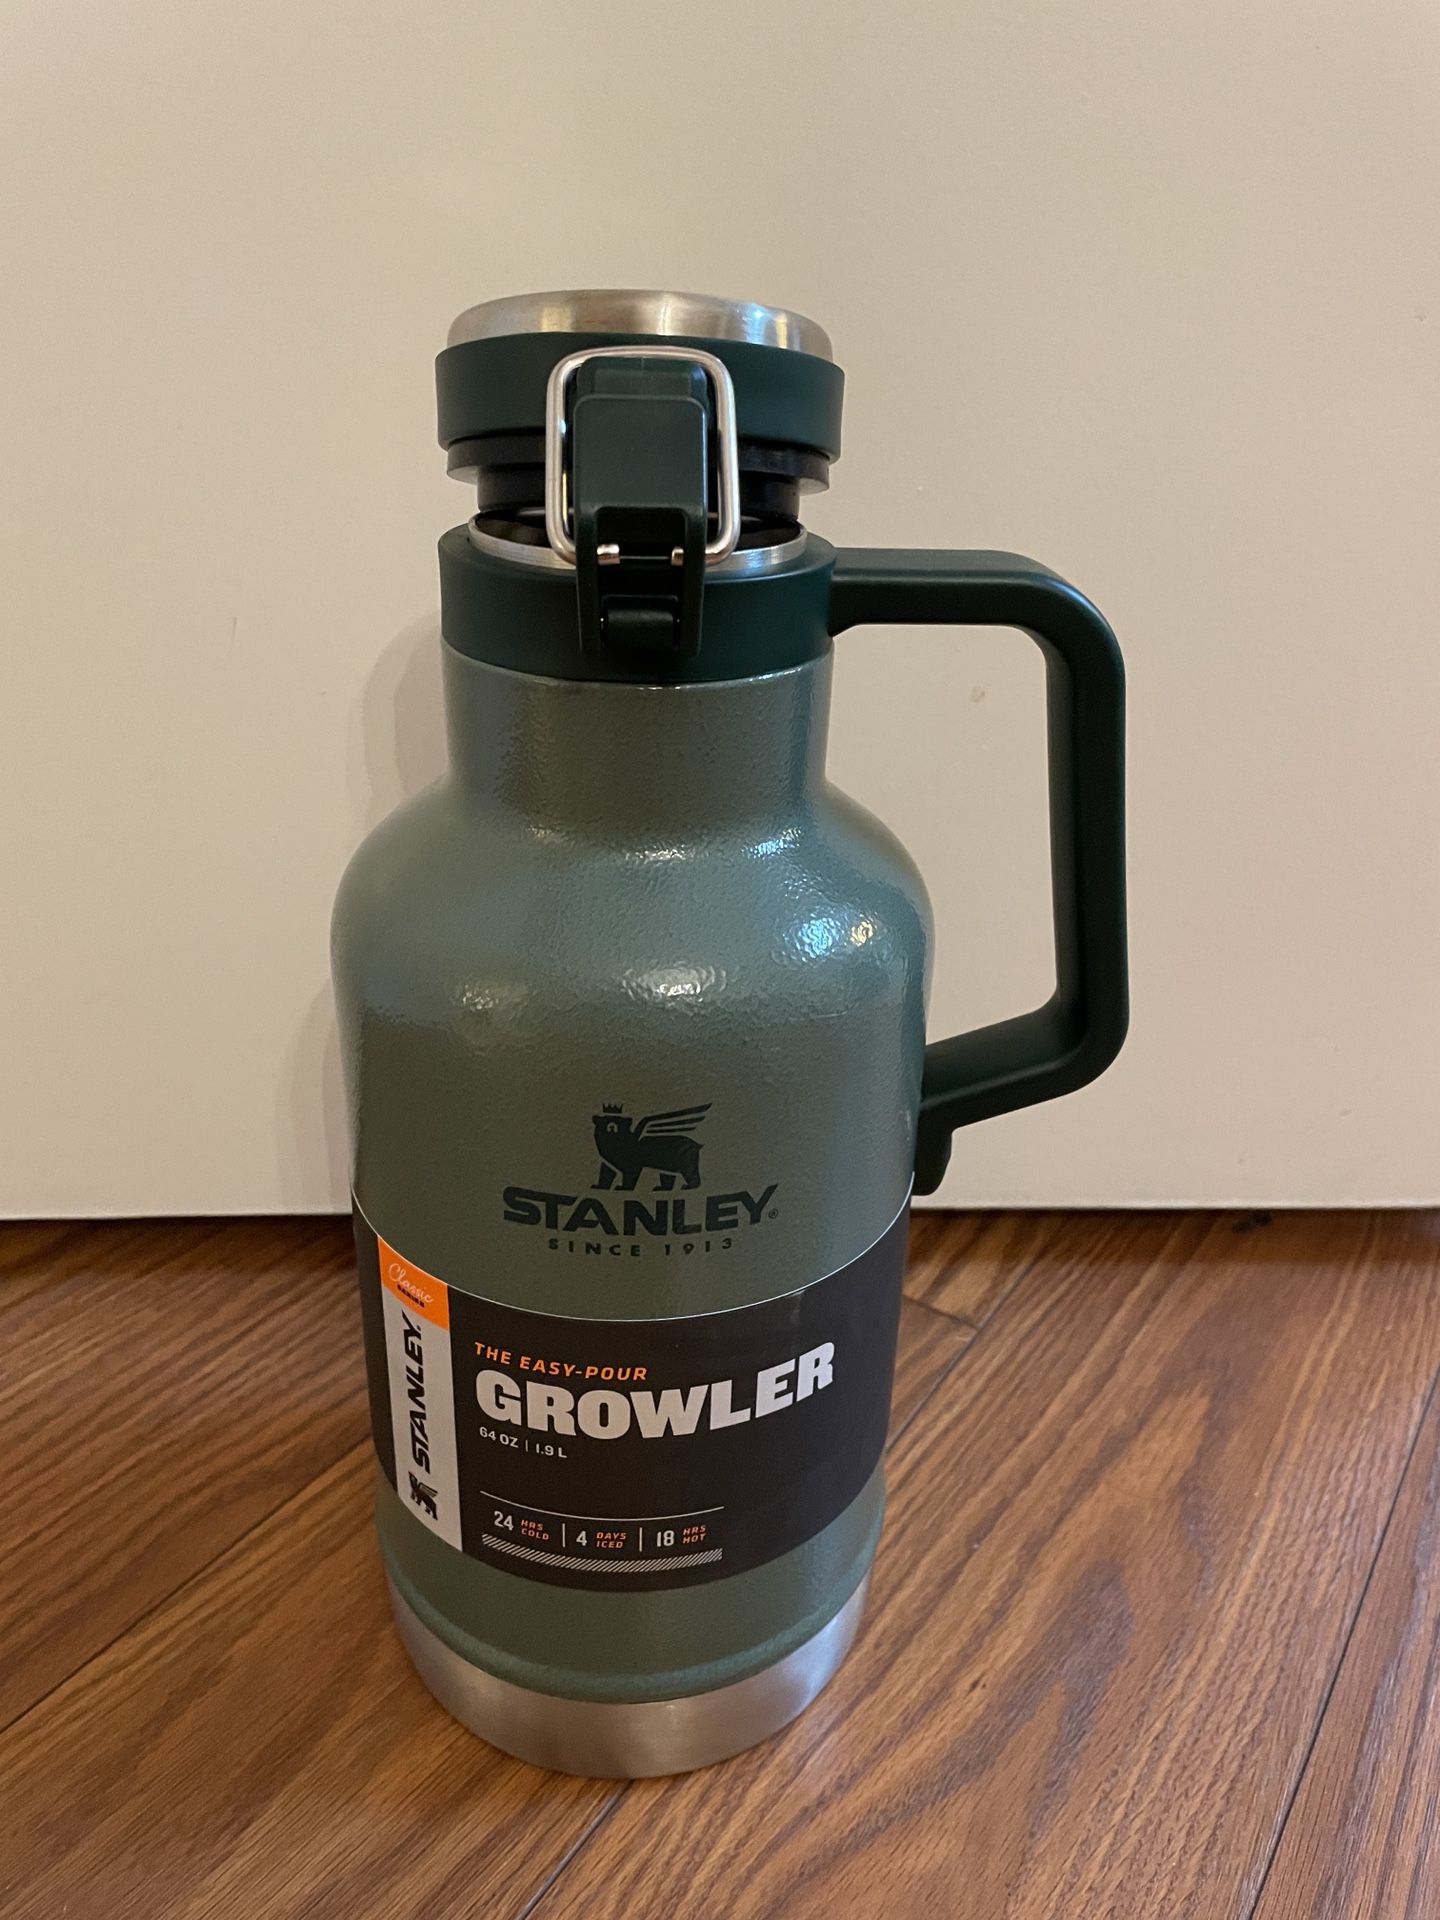 Classic Stanley Easy-pour Growler for Sale in Monrovia, CA - OfferUp